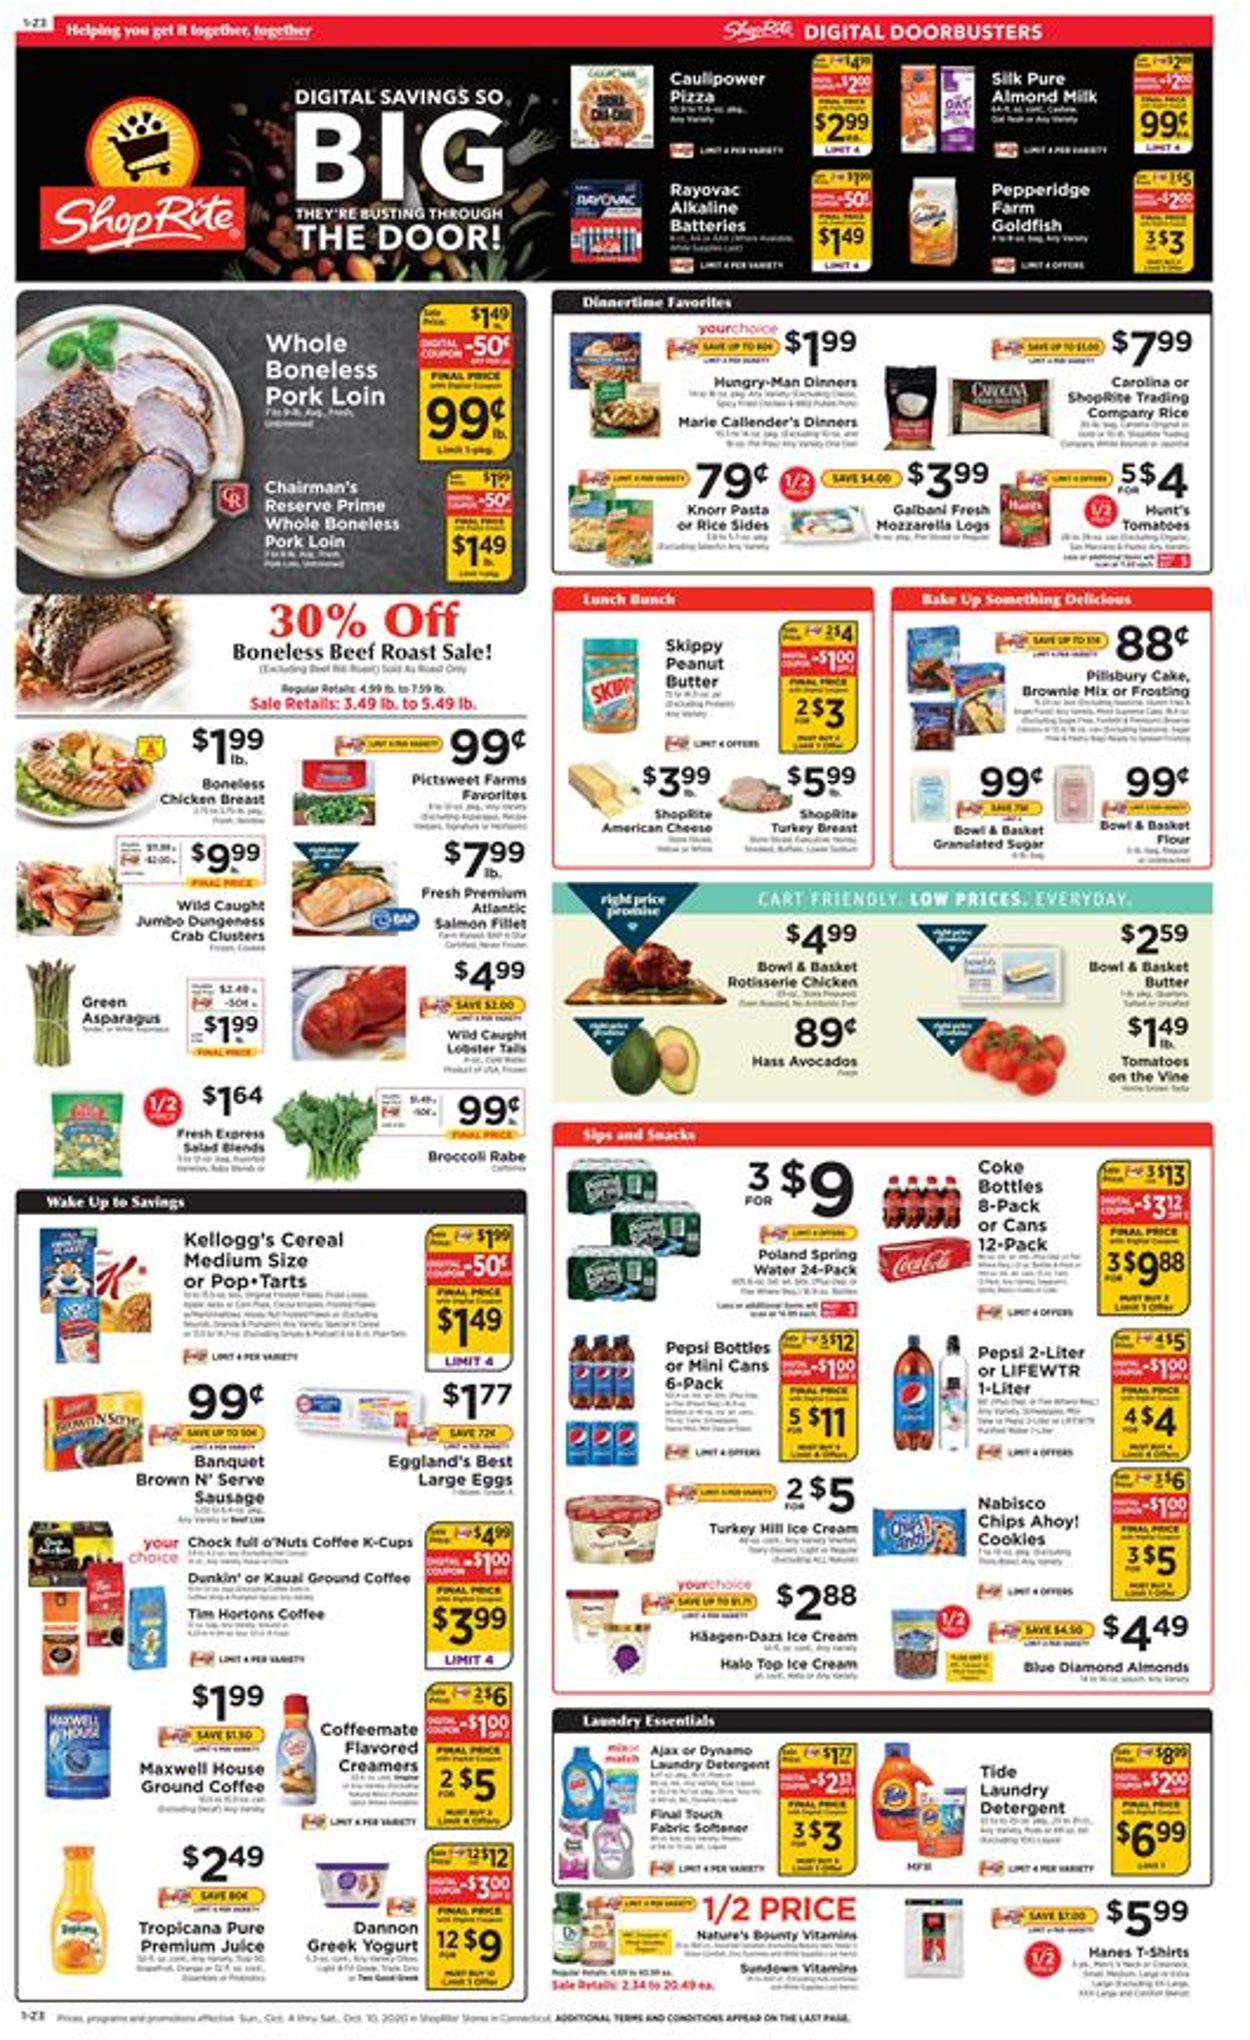 ShopRite Current weekly ad 10/04 - 10/10/2020 - frequent-ads.com